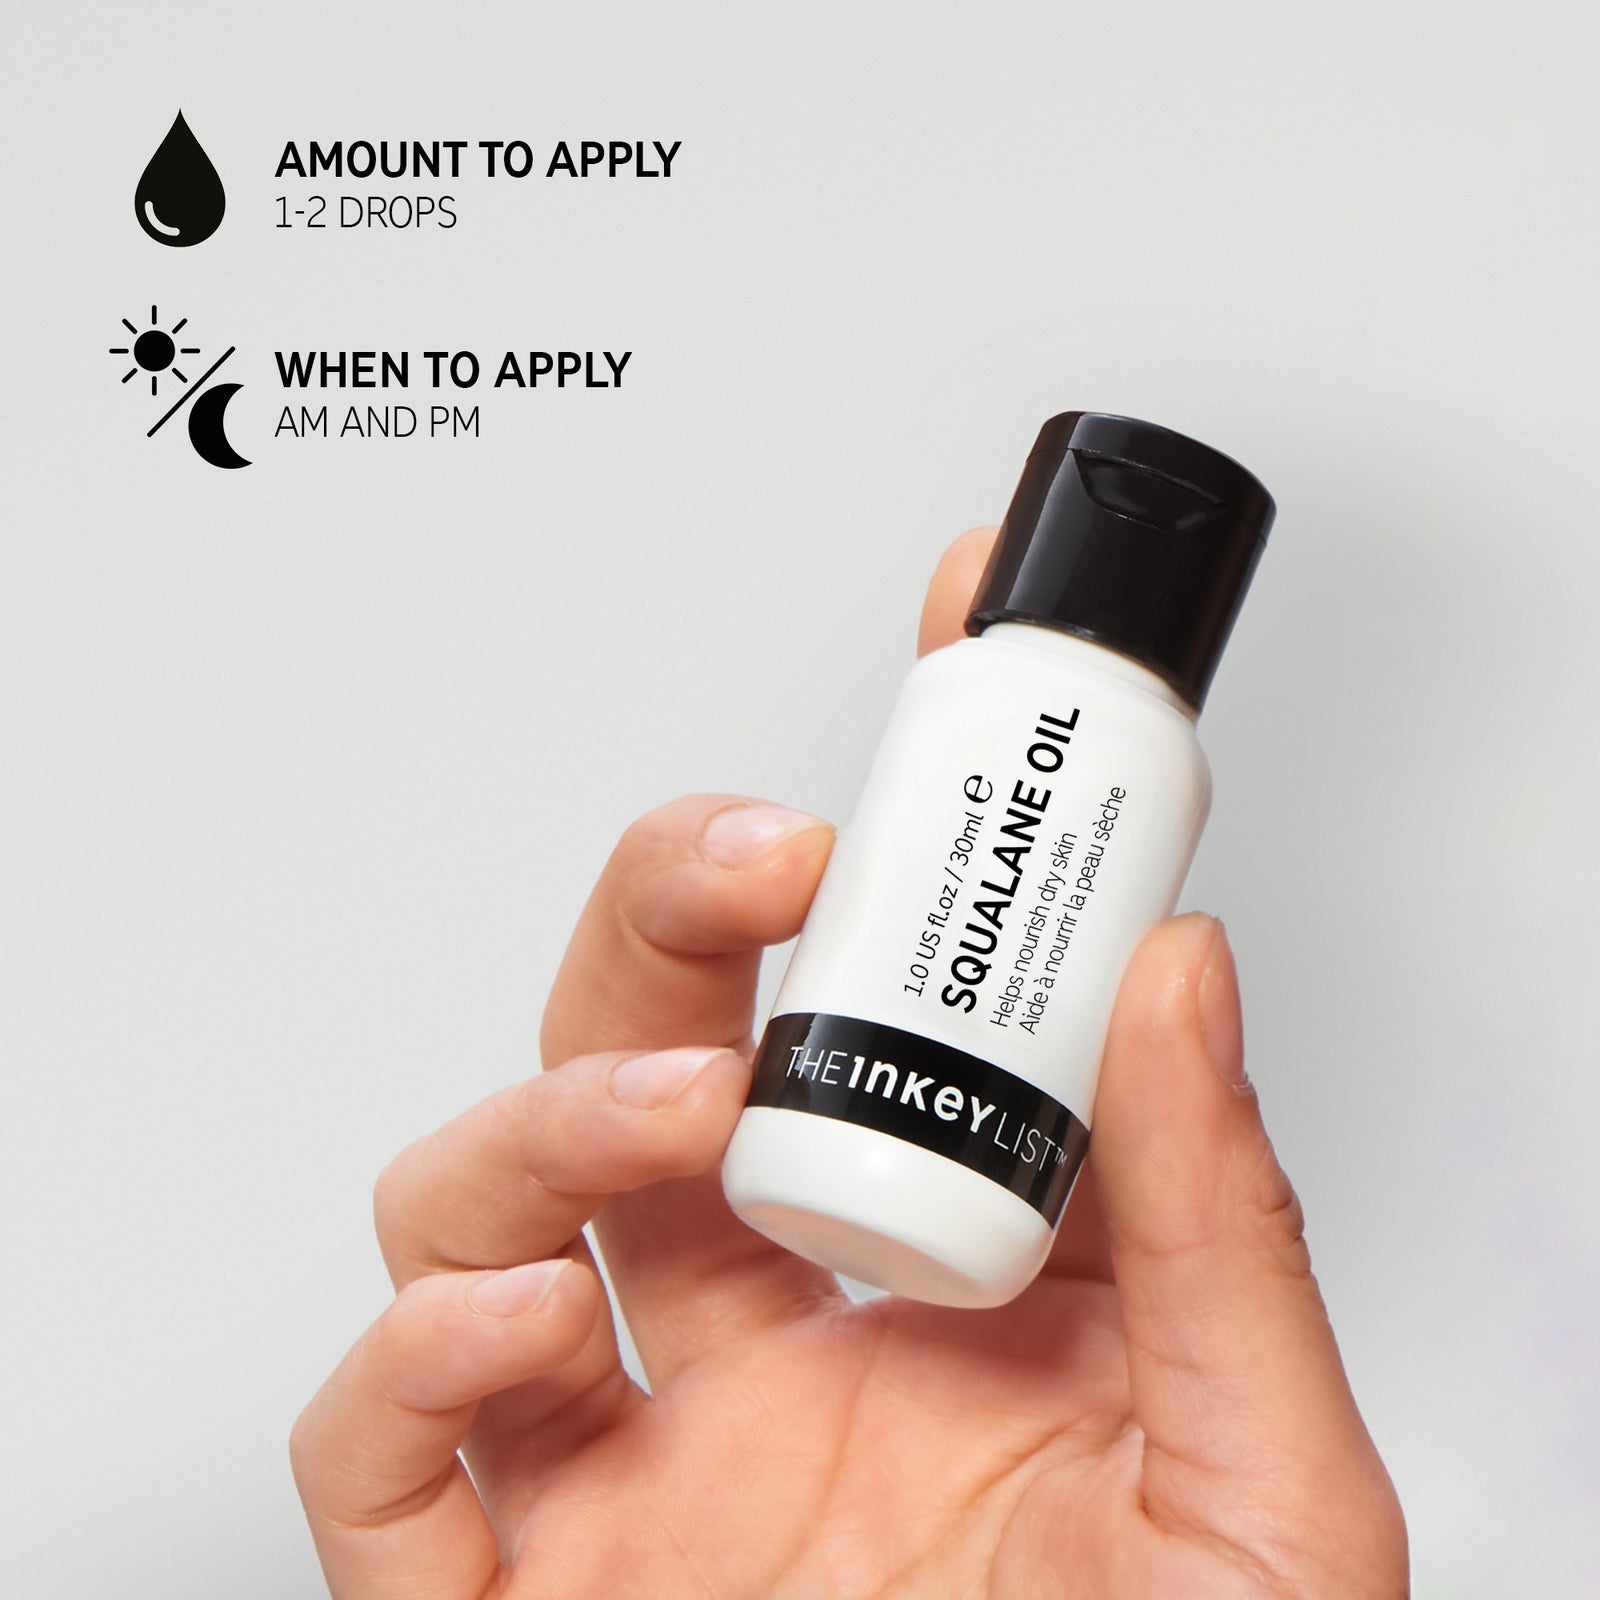 Squalane Oil when to apply in your routine and how much to apply with text explaining 'amount to apply (1-2 drops)' and 'when to apply (AM and PM)'